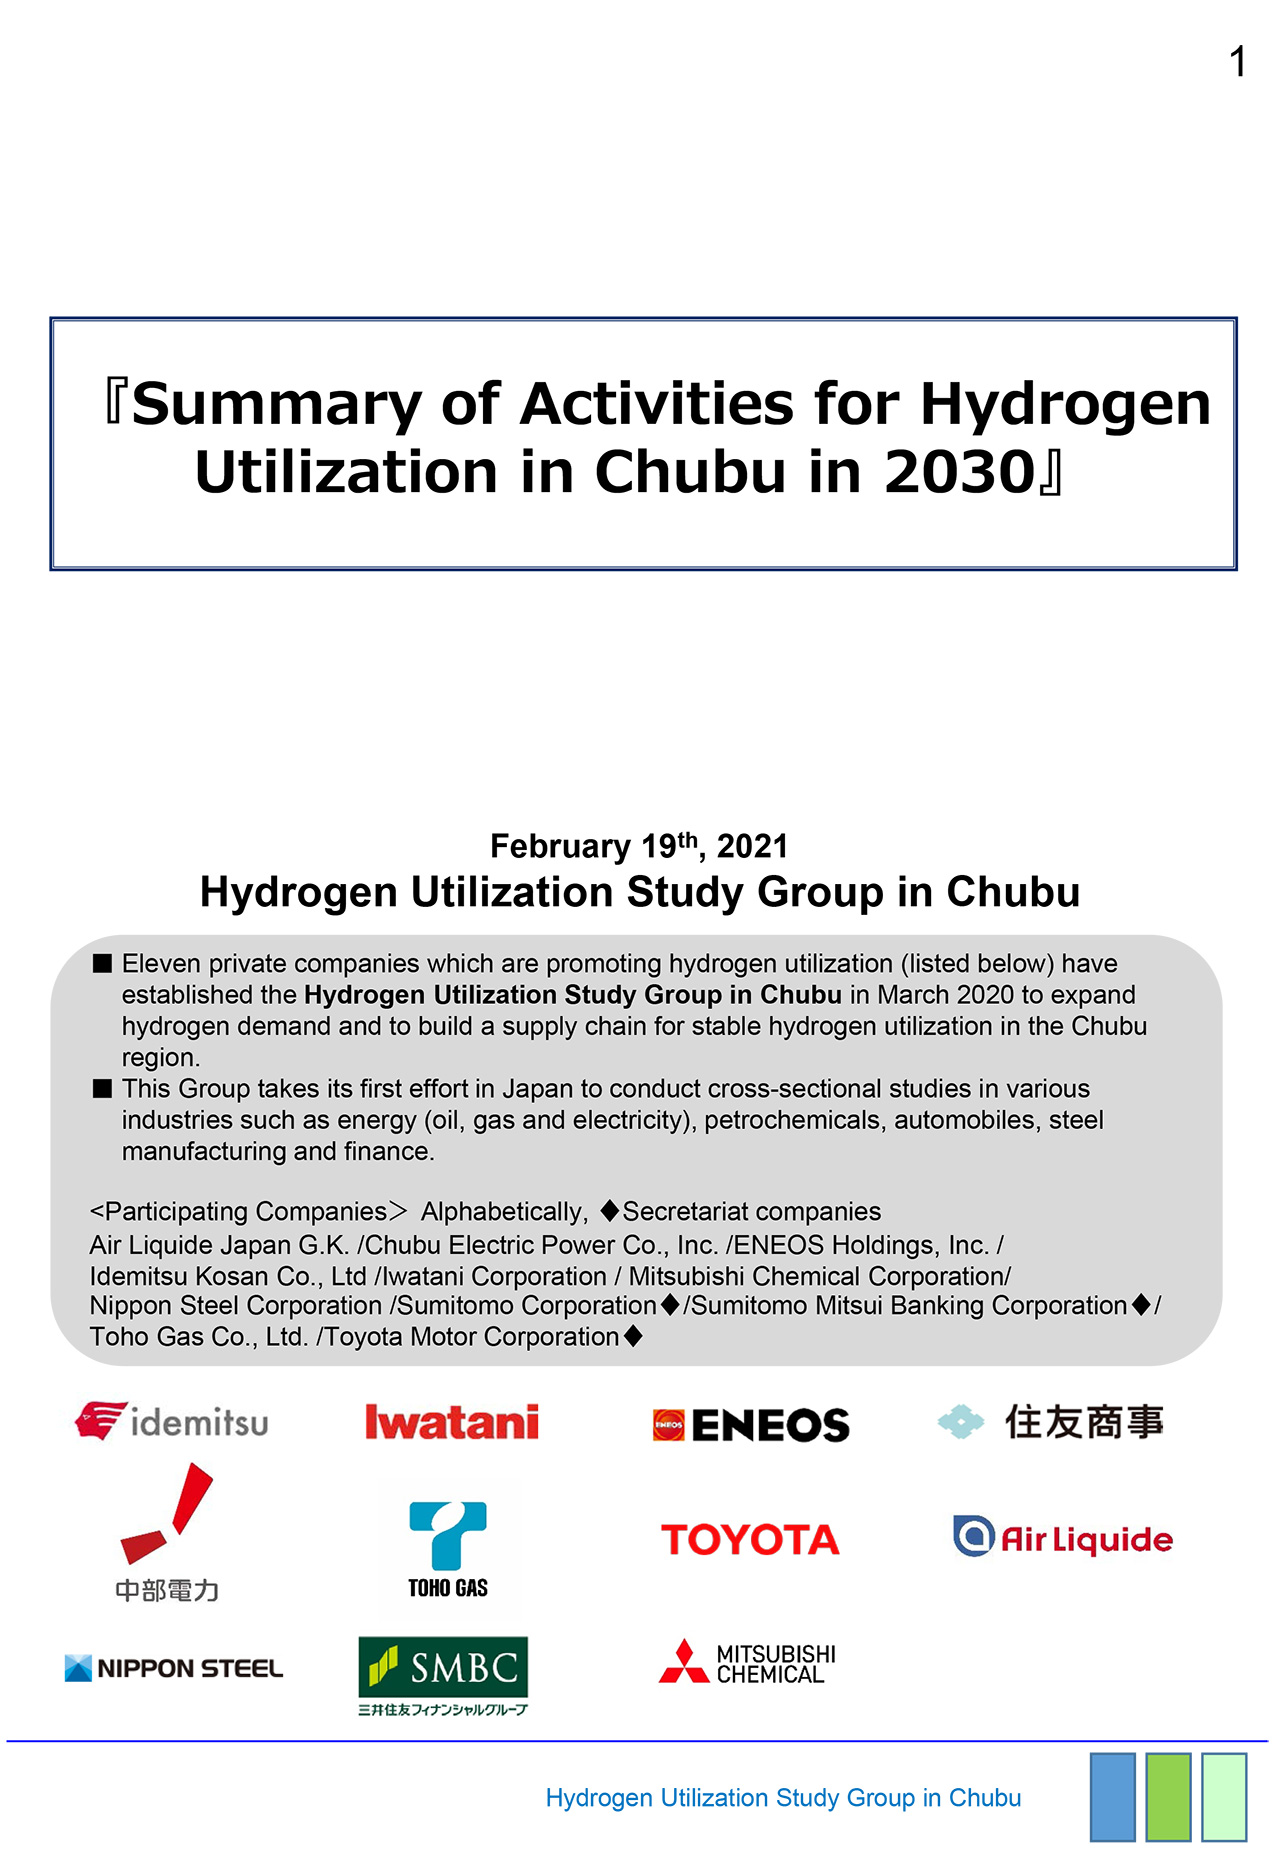 Summary of Activities for Hydrogen Utilization in Chubu in 2030